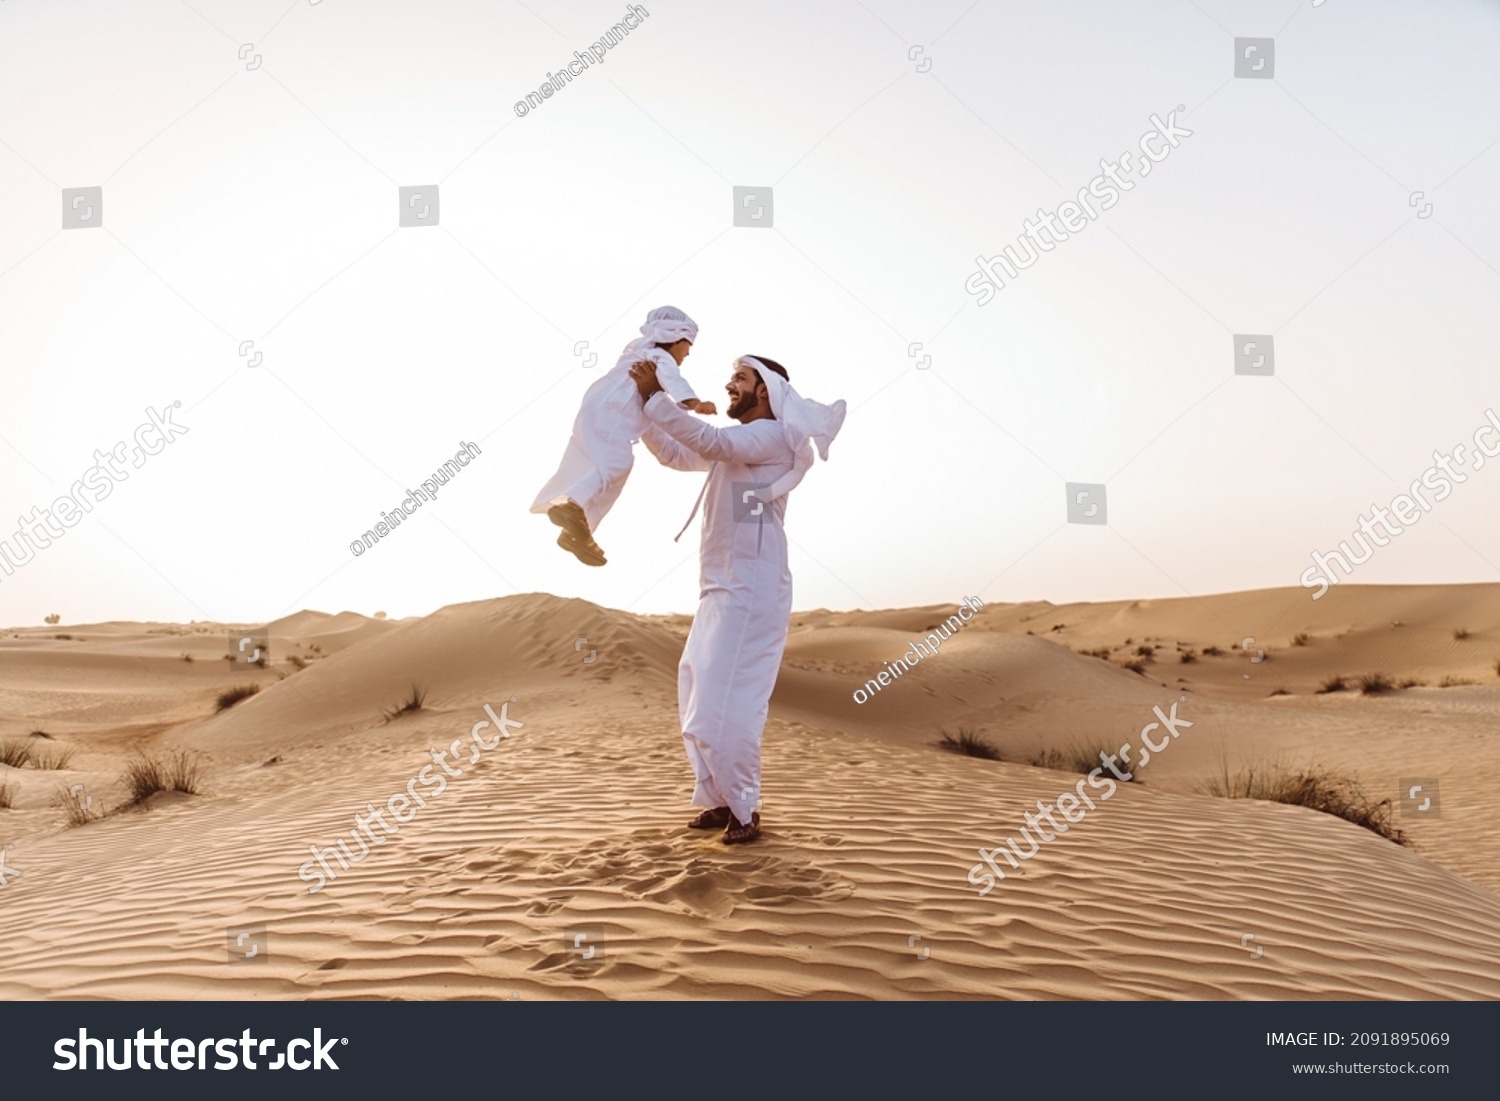 Father and son spending time in the desert on a safari day. Arabian family from the emirates wearing the traditional white dress. Concept about lifestyle and middle eastern cultures #2091895069